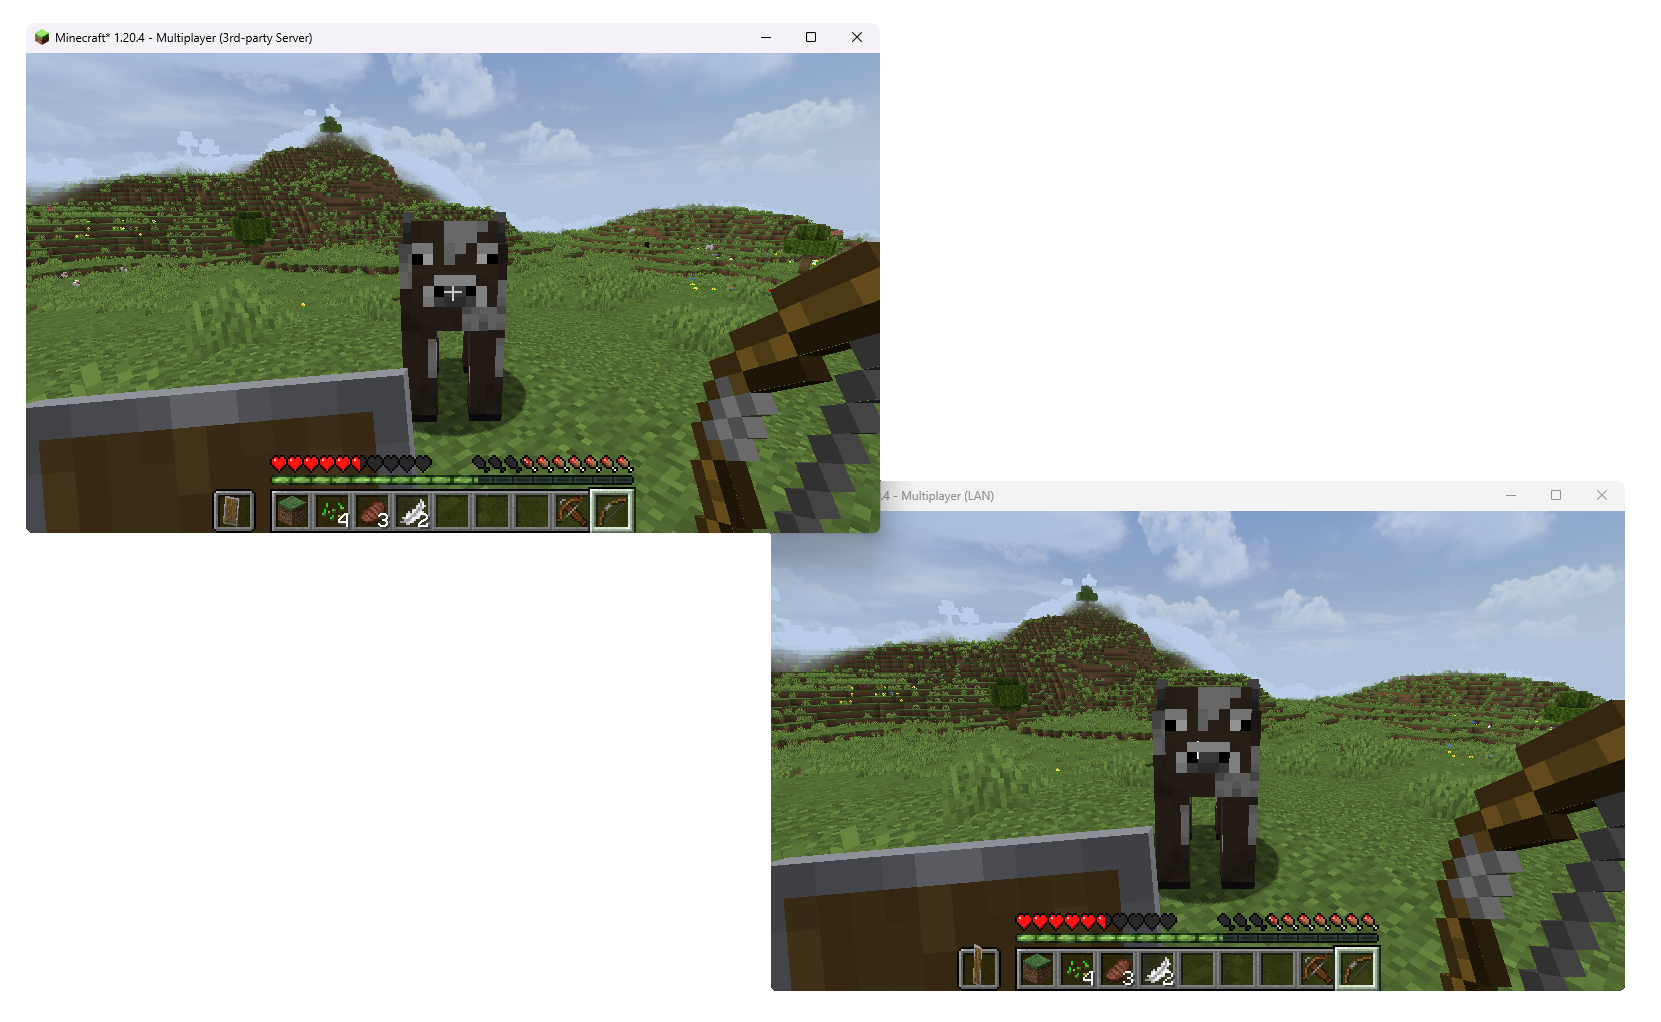 Screenshot showing two Minecraft instances, one spectating the other.